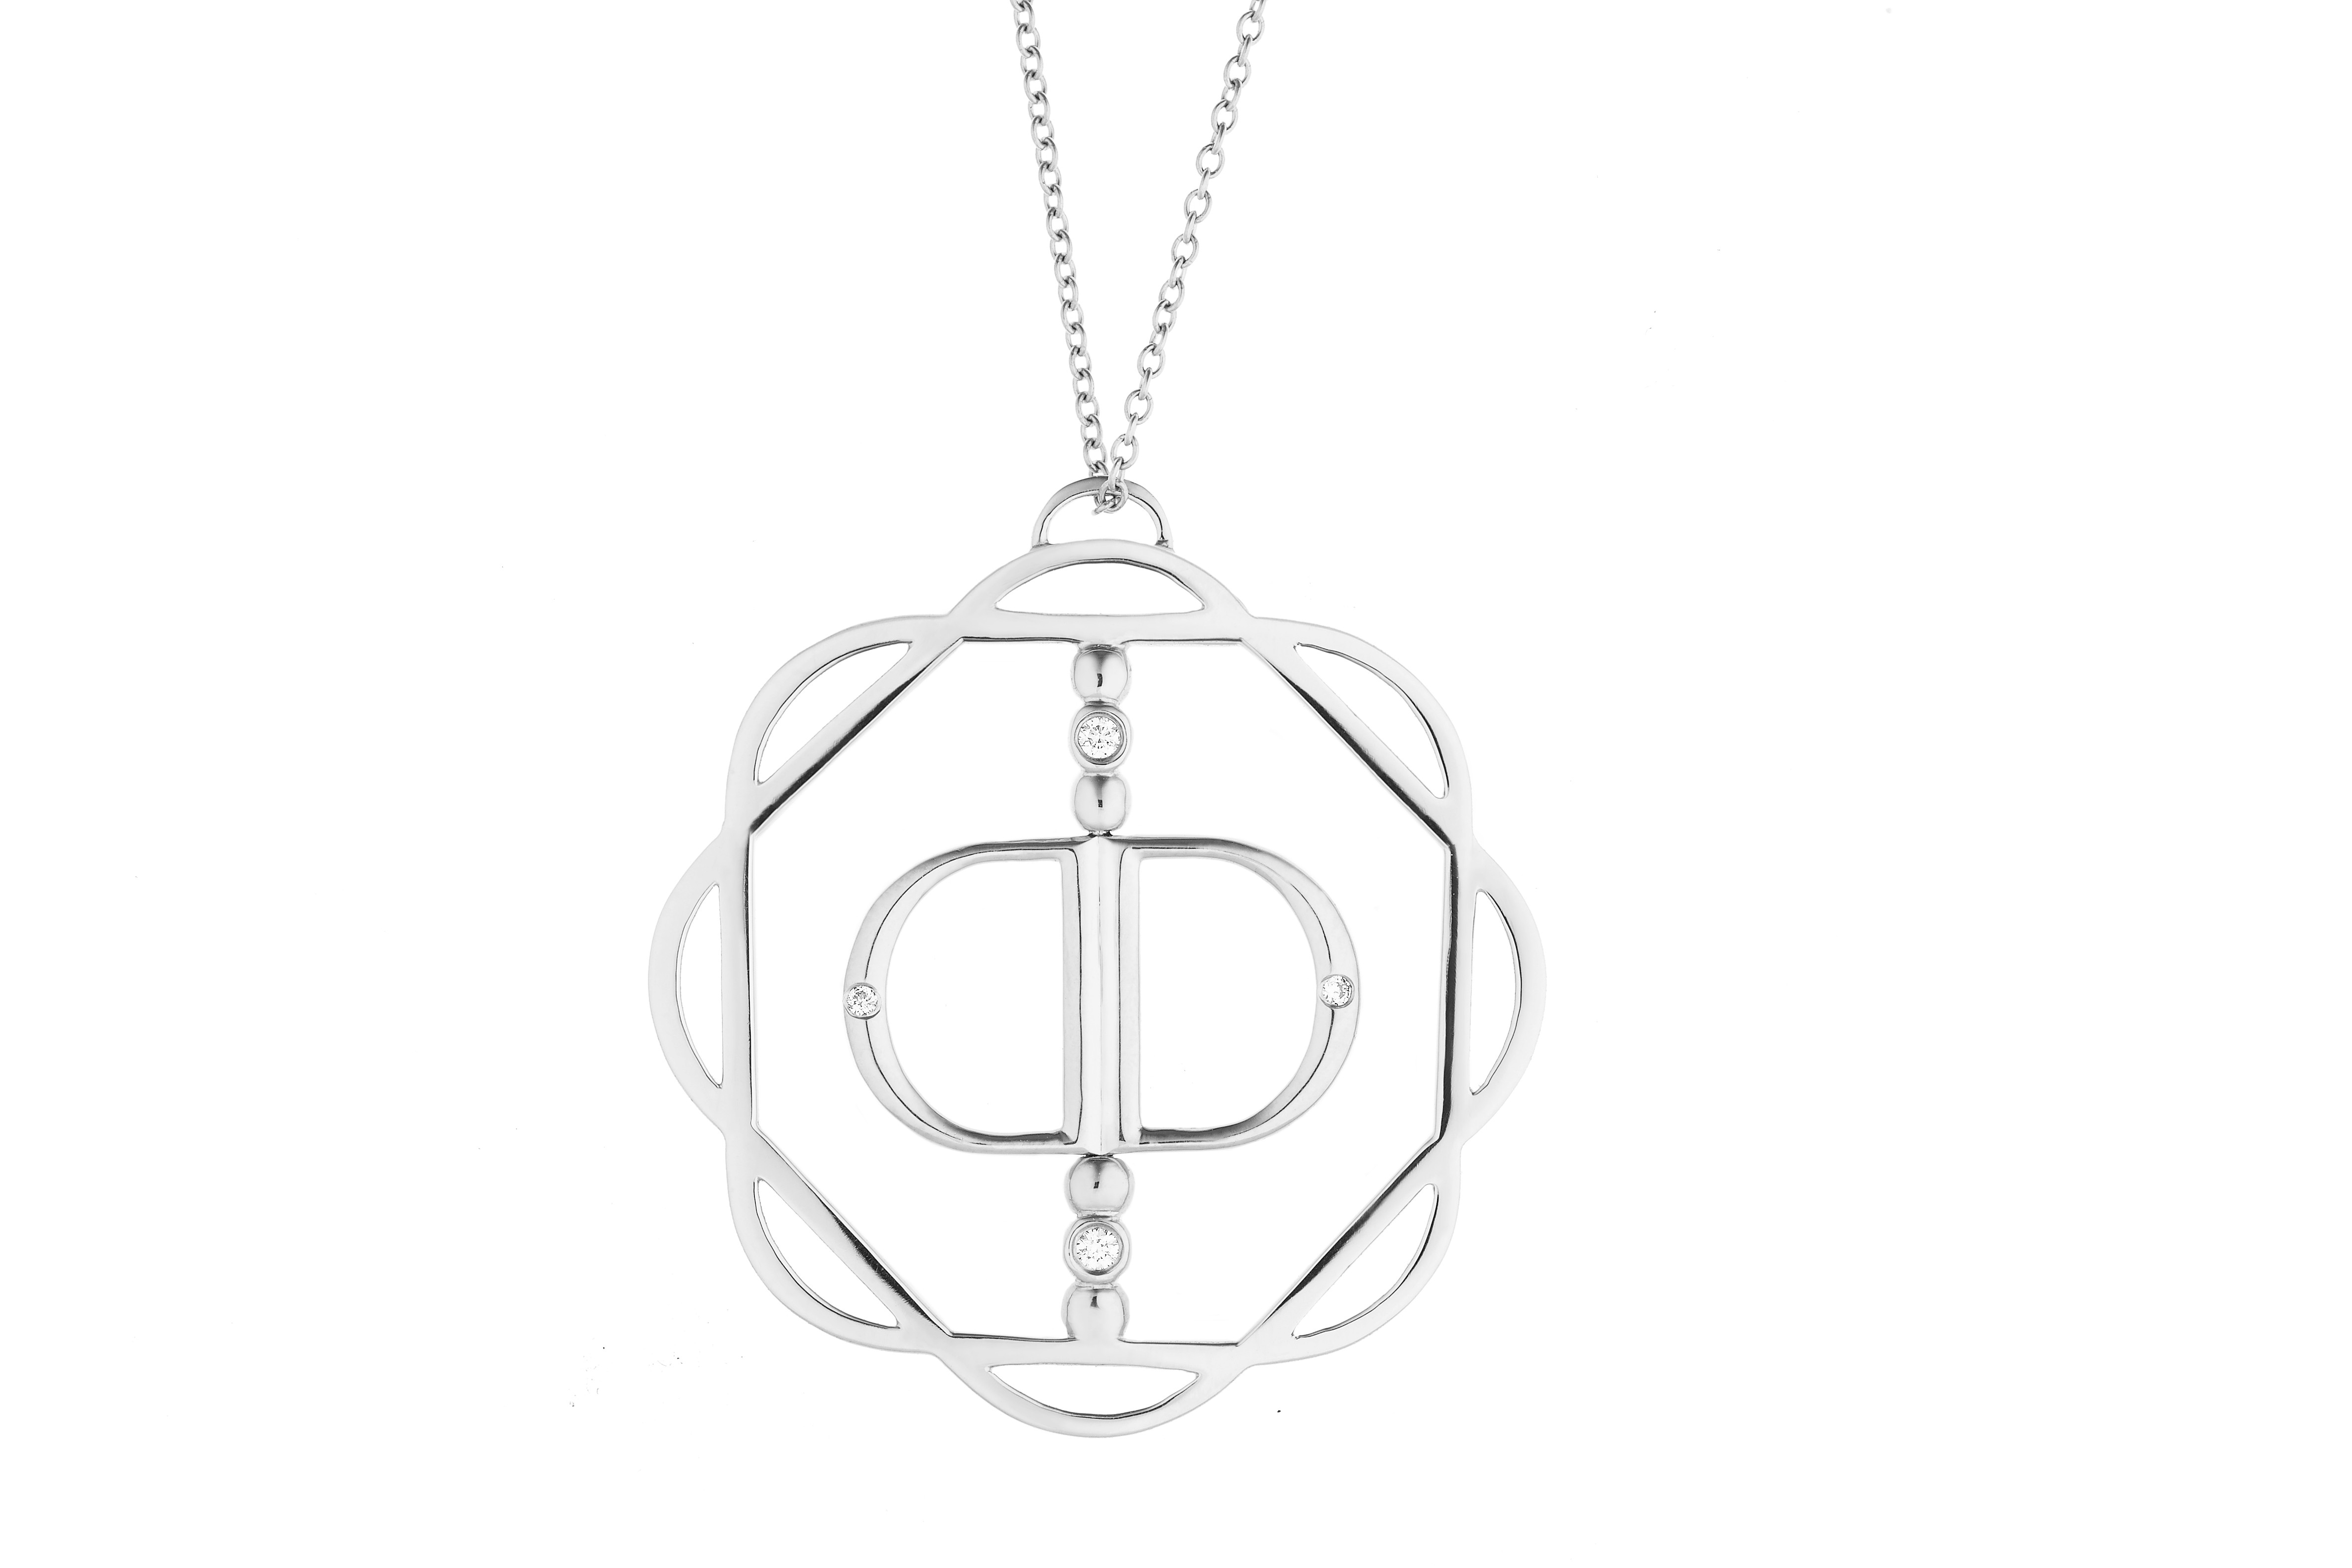 18K White Gold Cut-Out Flora Pendant with Mirror Double D and 4 Lab Created Diamonds on AIDIA Extendable Link Chain